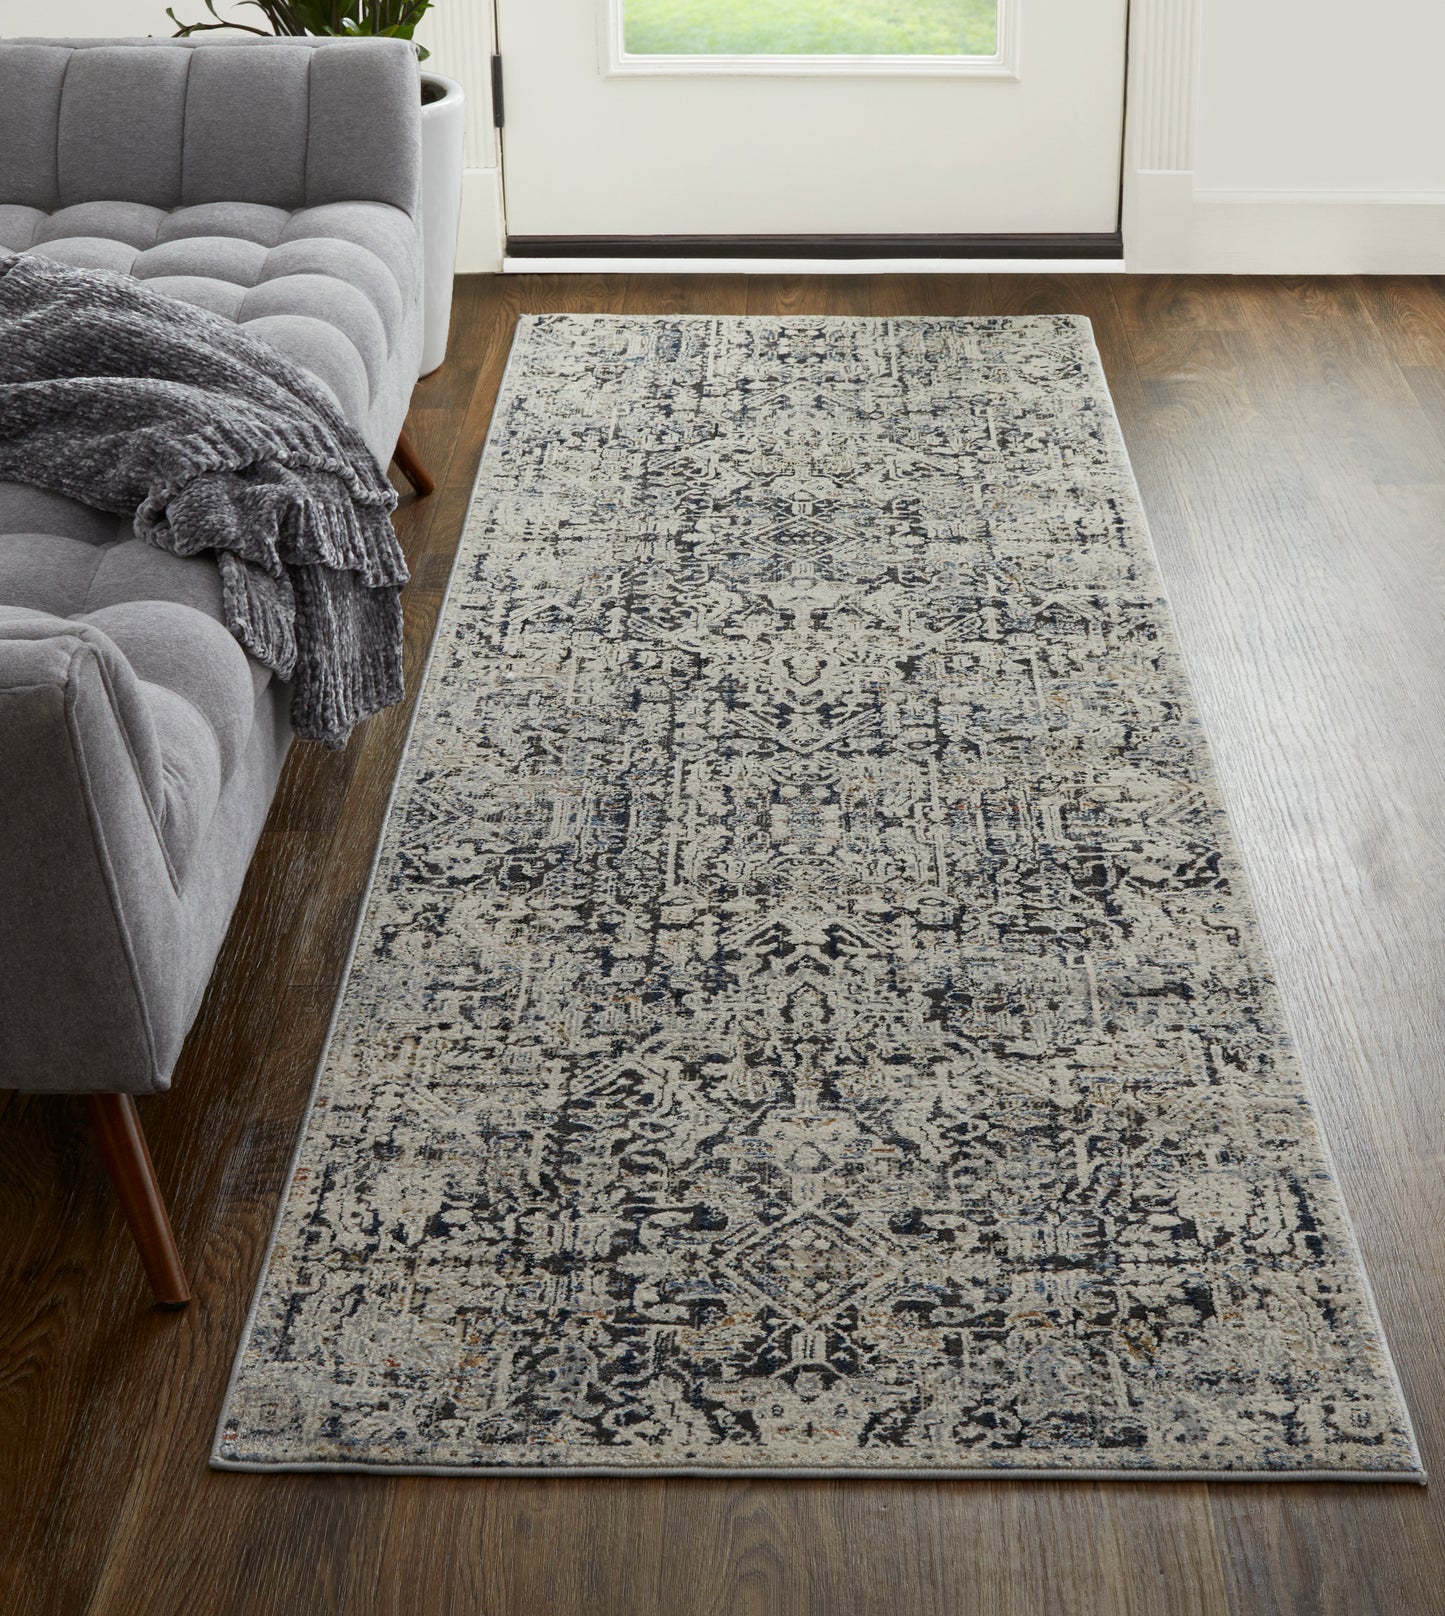 Kaia 39HUF Power Loomed Synthetic Blend Indoor Area Rug by Feizy Rugs